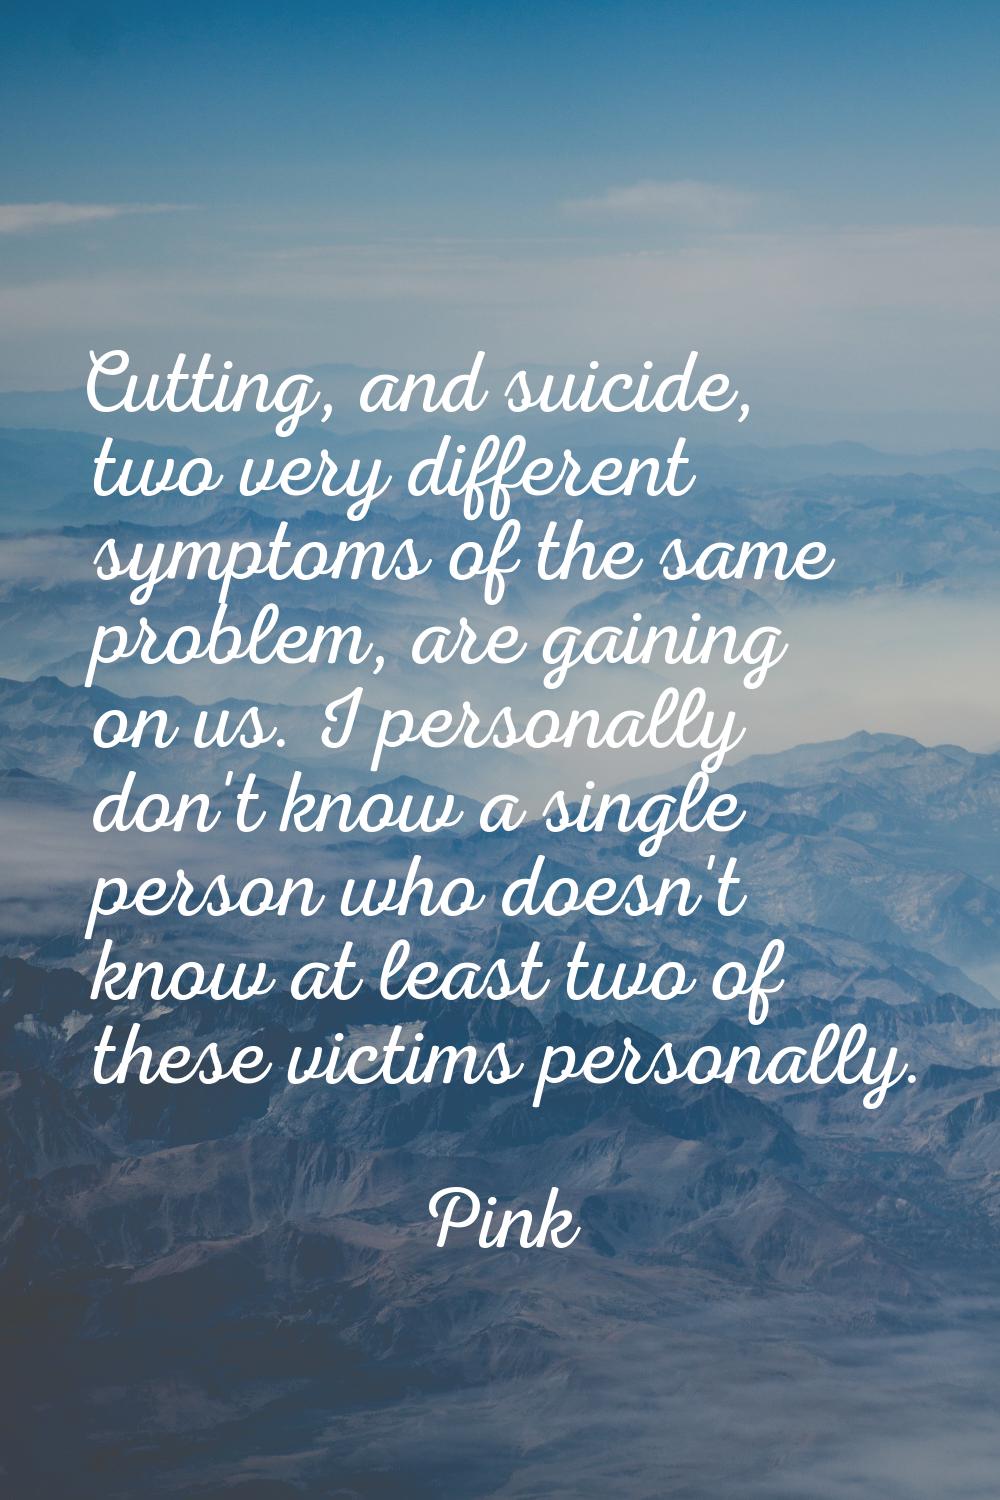 Cutting, and suicide, two very different symptoms of the same problem, are gaining on us. I persona